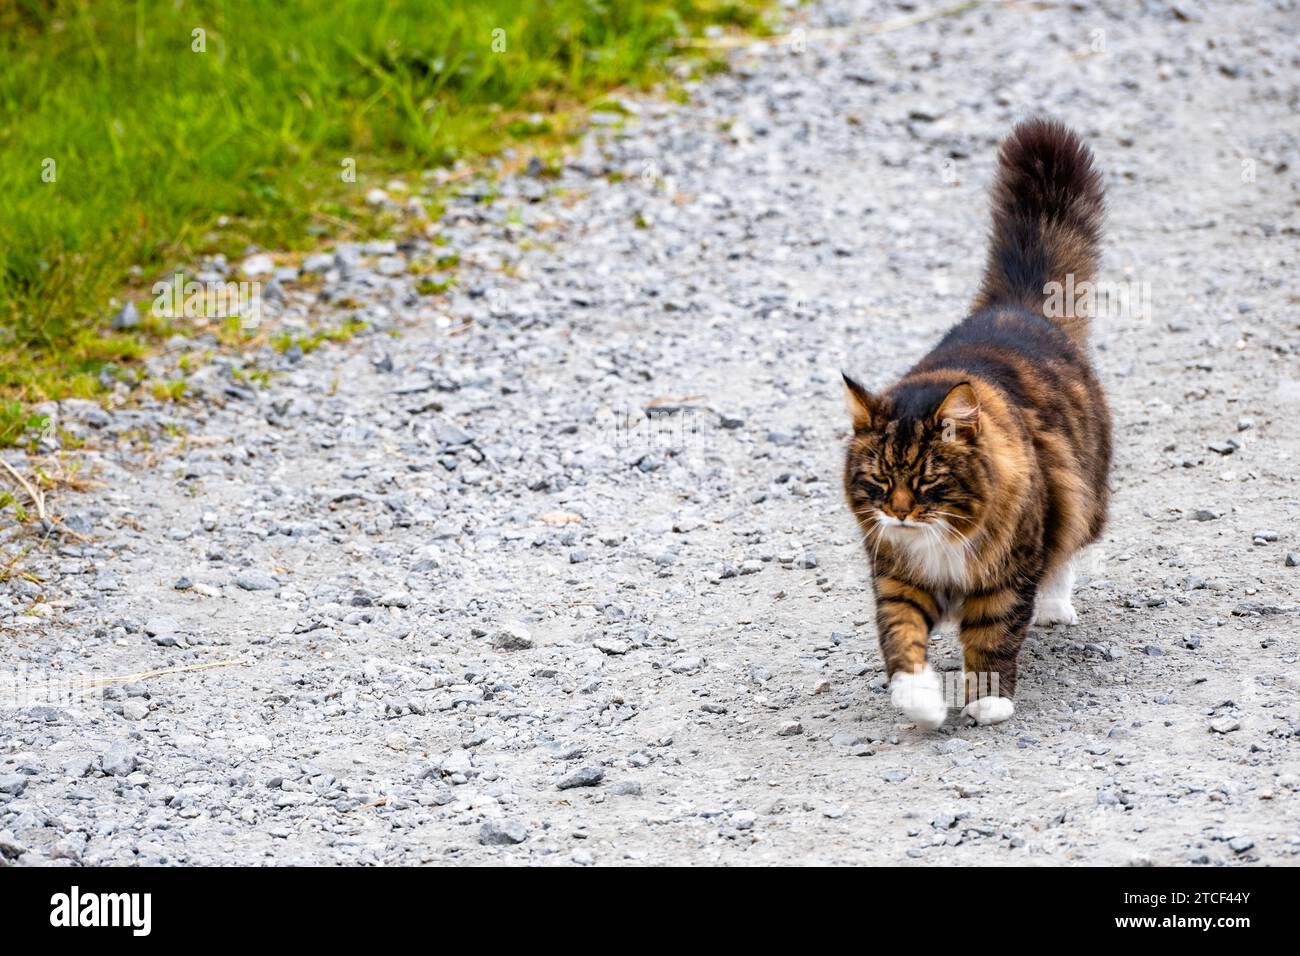 A cat sauntering along a paved road. Stock Photo